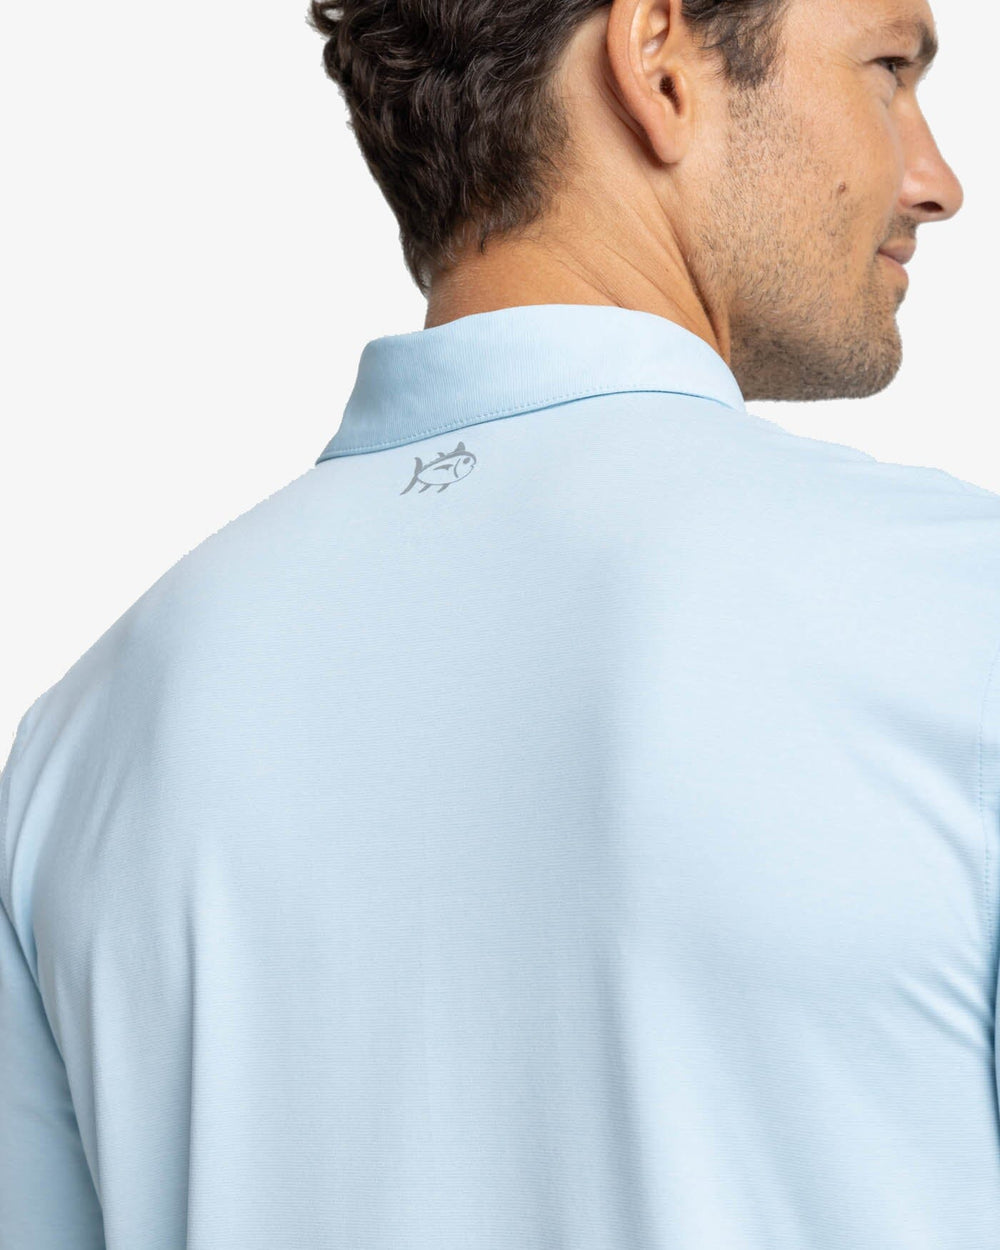 The yoke view of the Southern Tide brrr-eeze Heather Performance Polo Shirt by Southern Tide - Heather Dream Blue